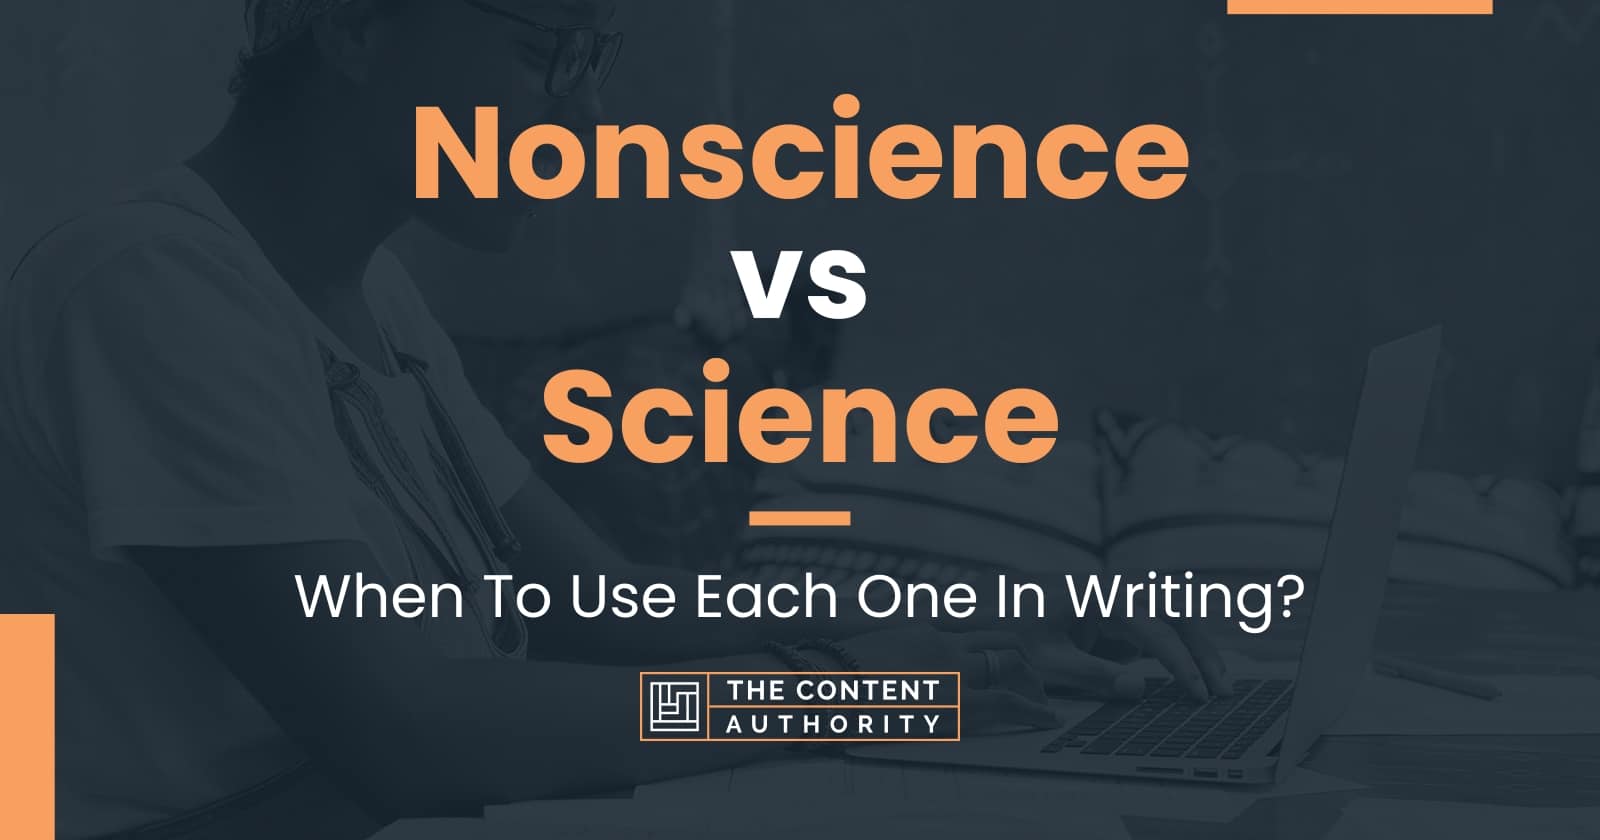 Nonscience vs Science: When To Use Each One In Writing?